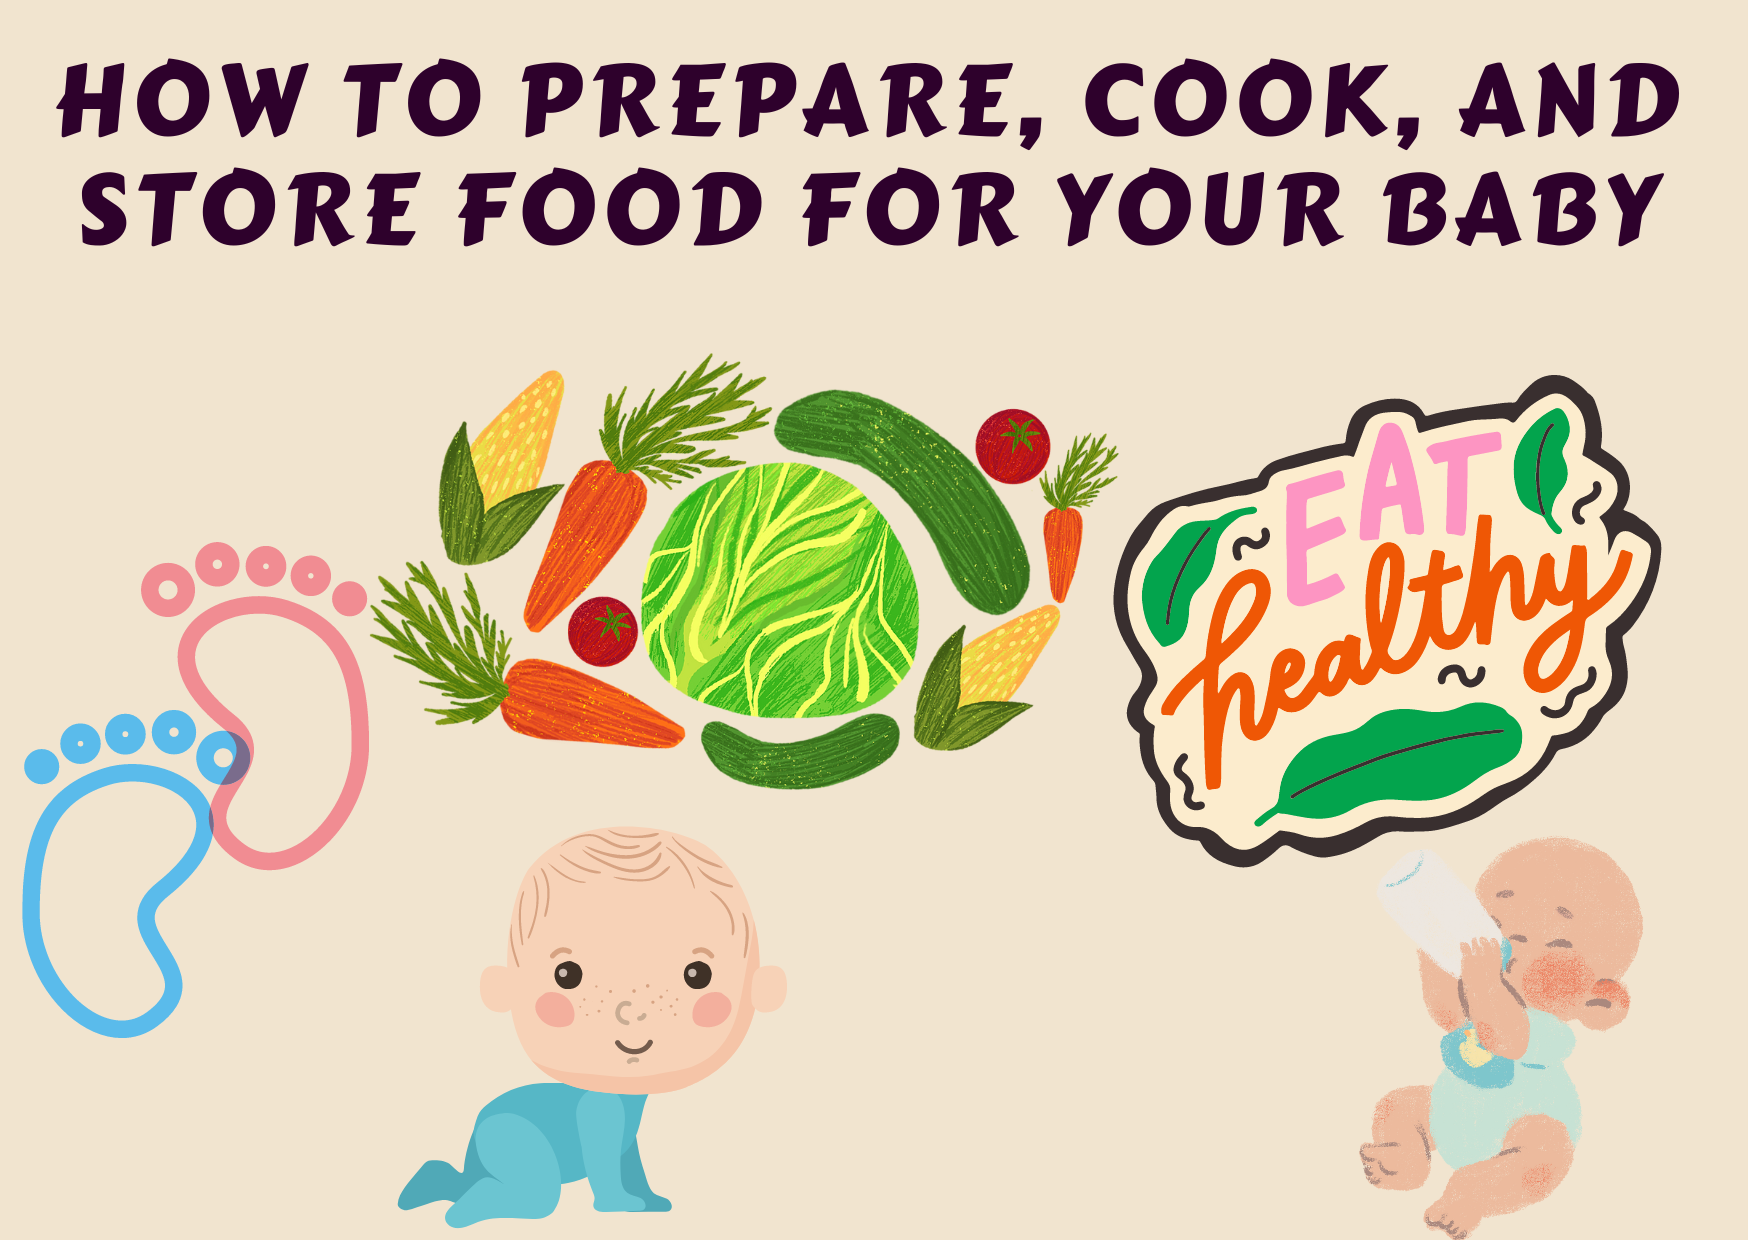 How to Prepare, Cook, and Store Food for Your Baby